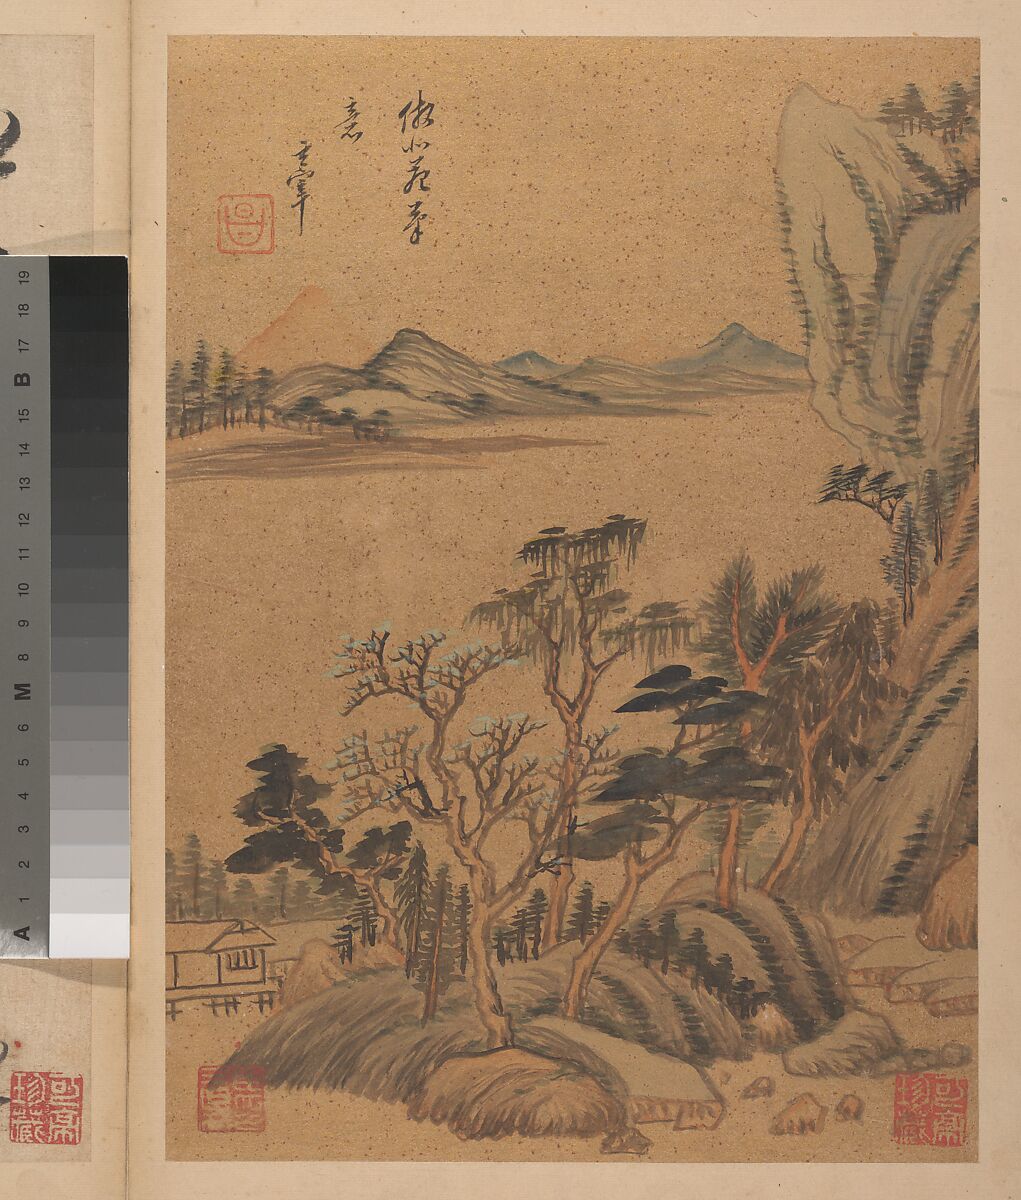 Landscapes and poems, Dong Qichang  Chinese, Album of eight double leaves; ink, gold, and color on gold-flecked paper and ink on satin, China